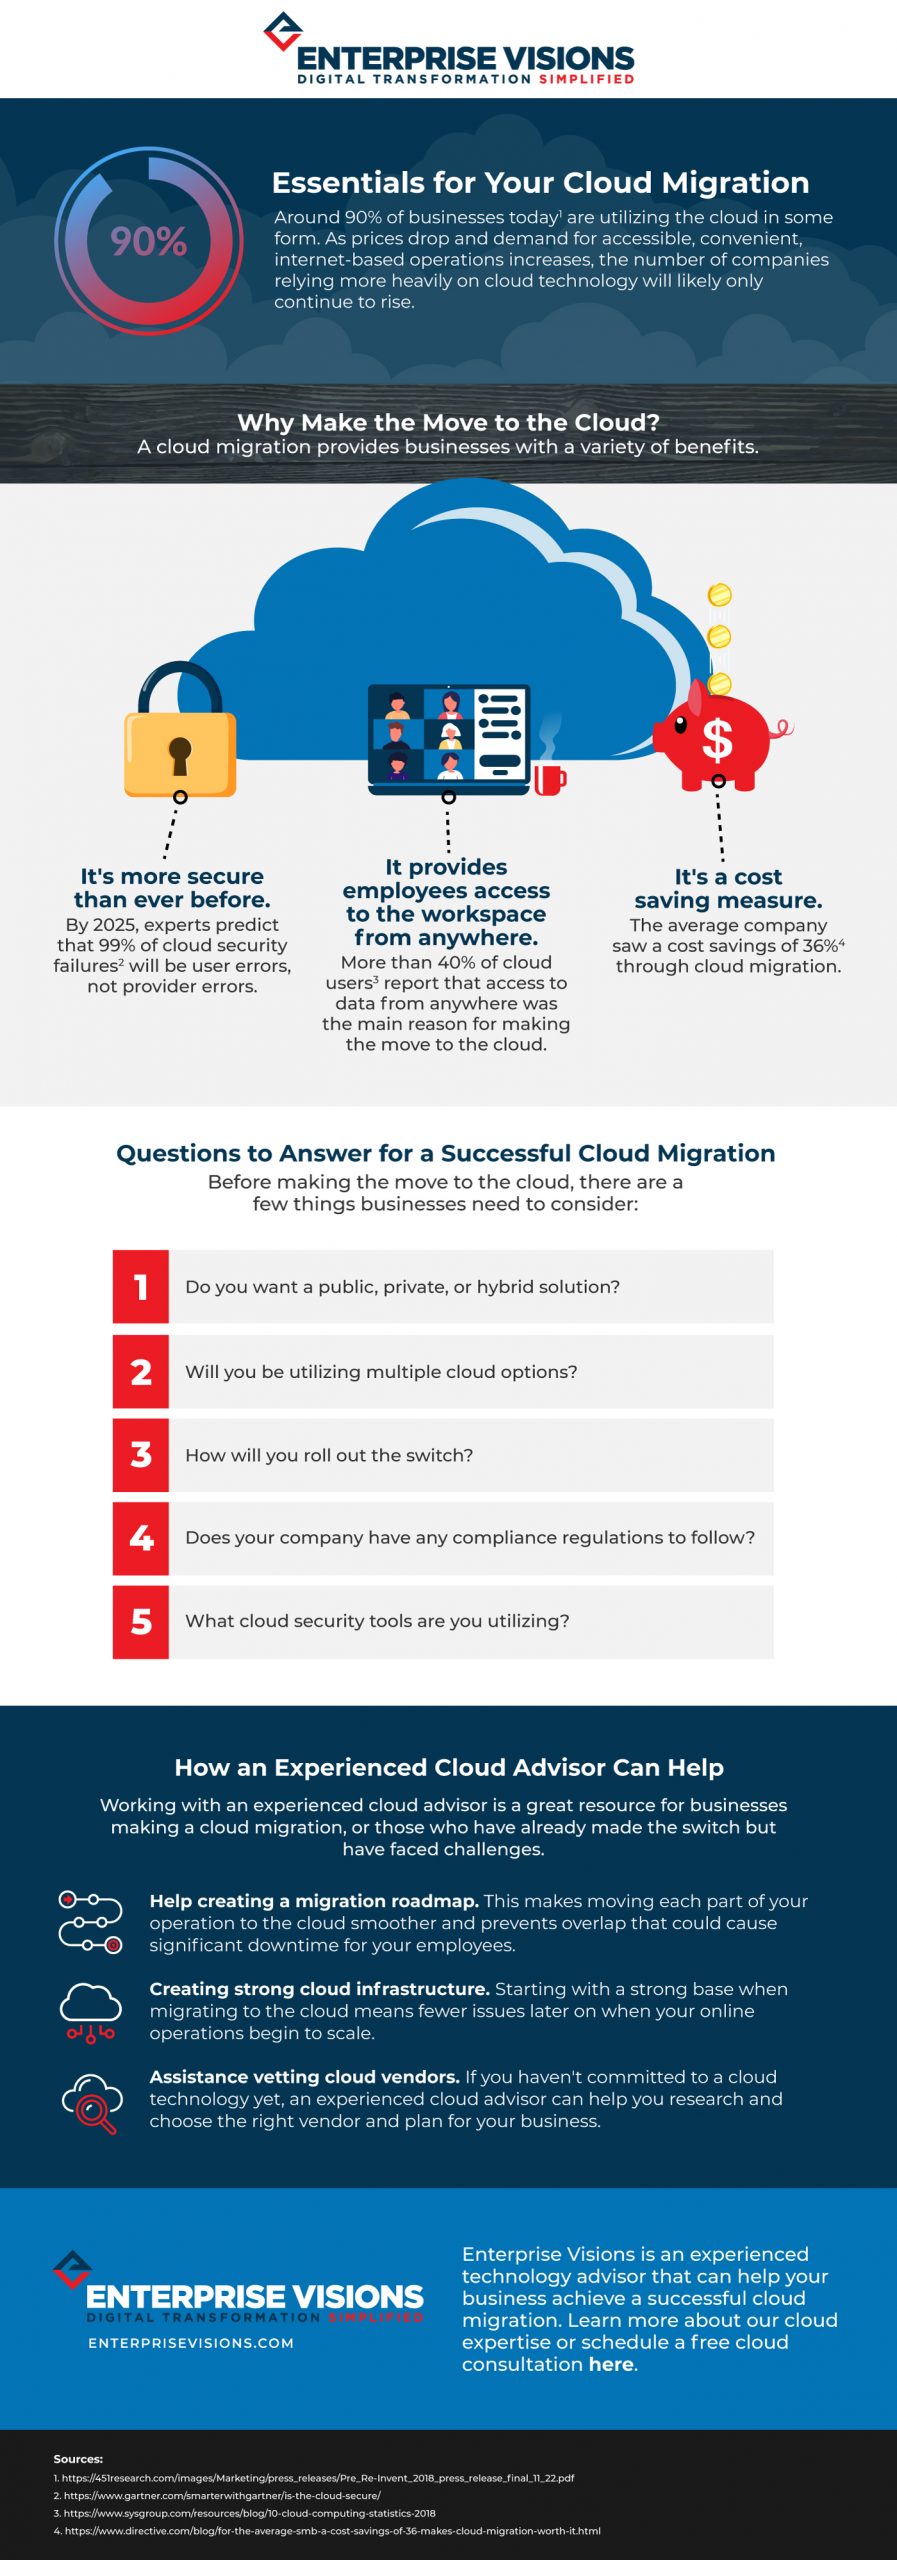 Essential information to know for a cloud migration.